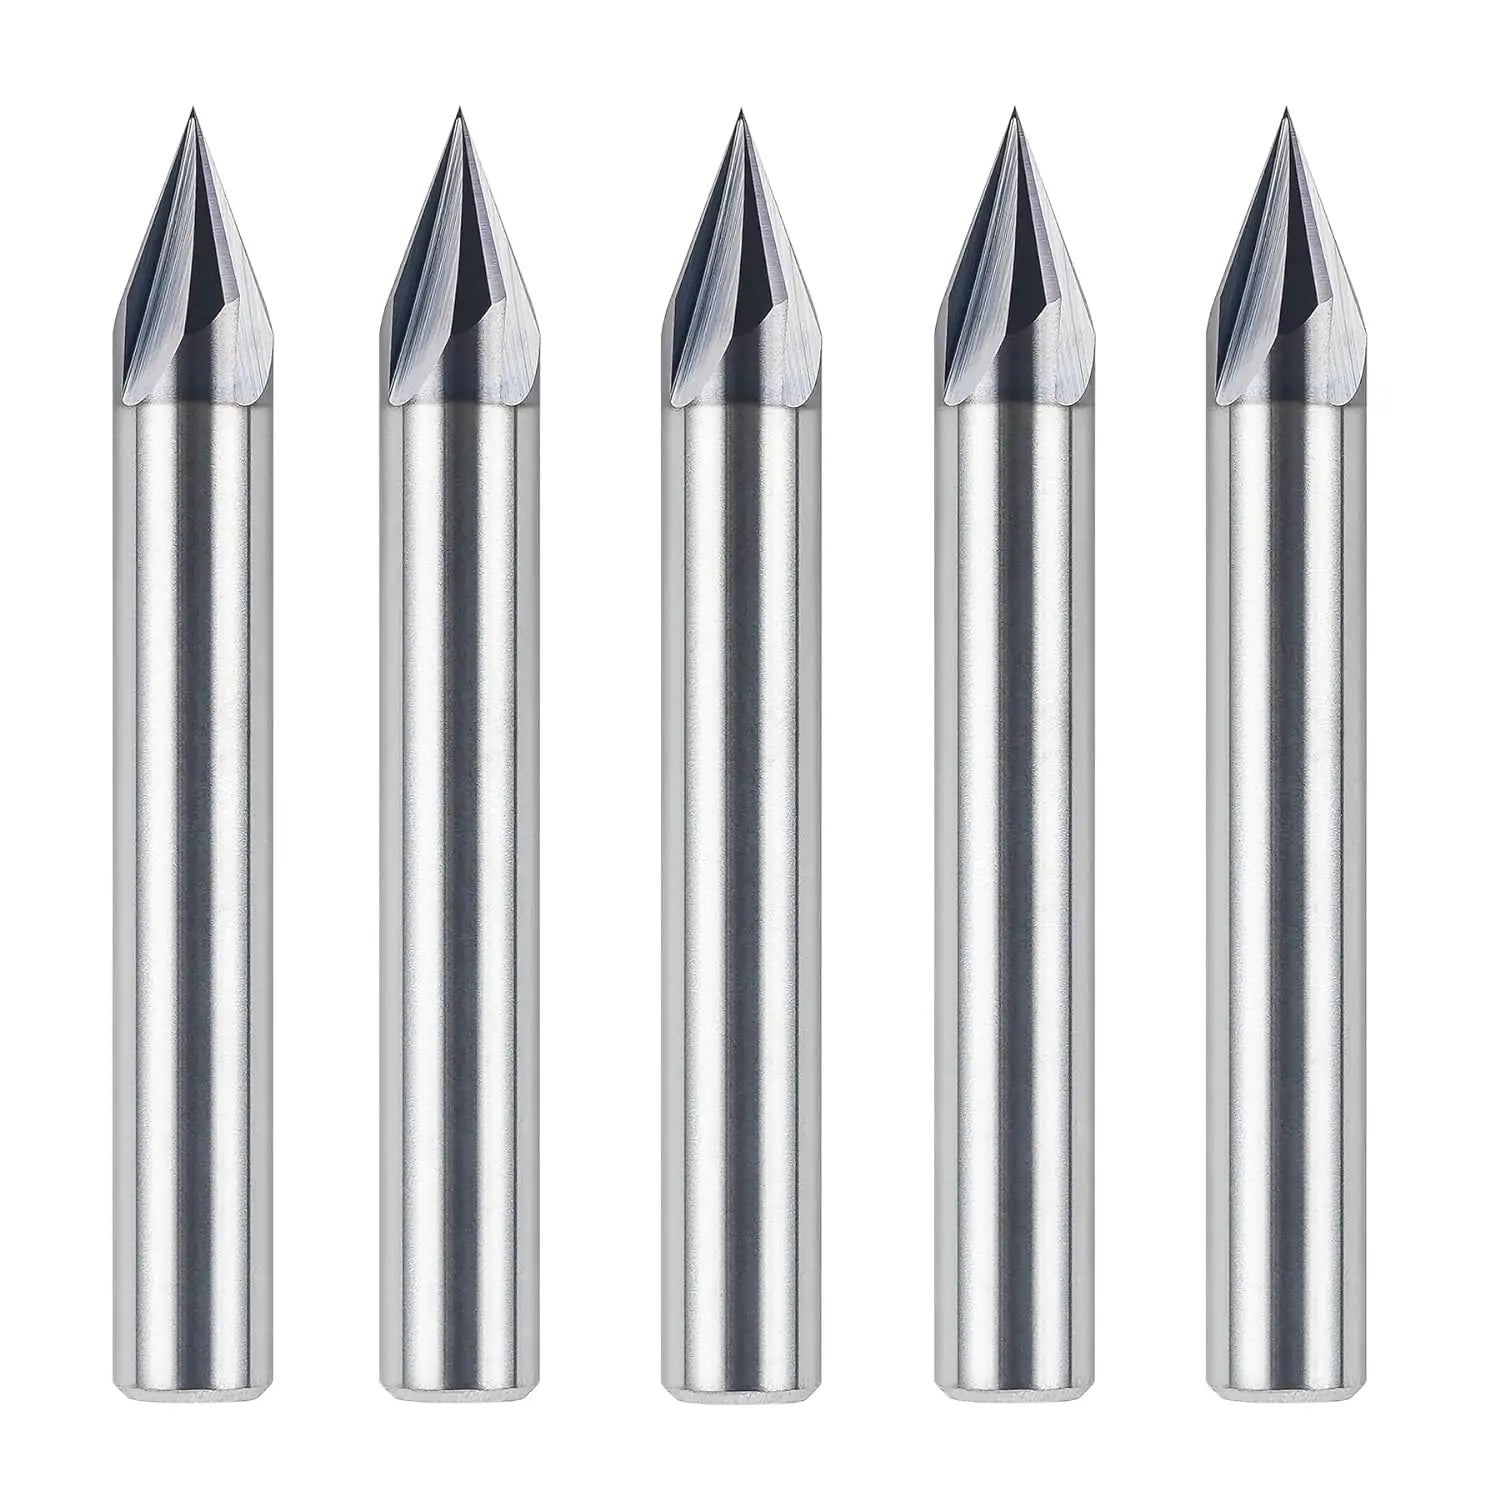 5PCS 45 Degree V Bit 14 Inch Shank, 4-Flute Carbide V Groove Router Bit with TiAIN Coated,